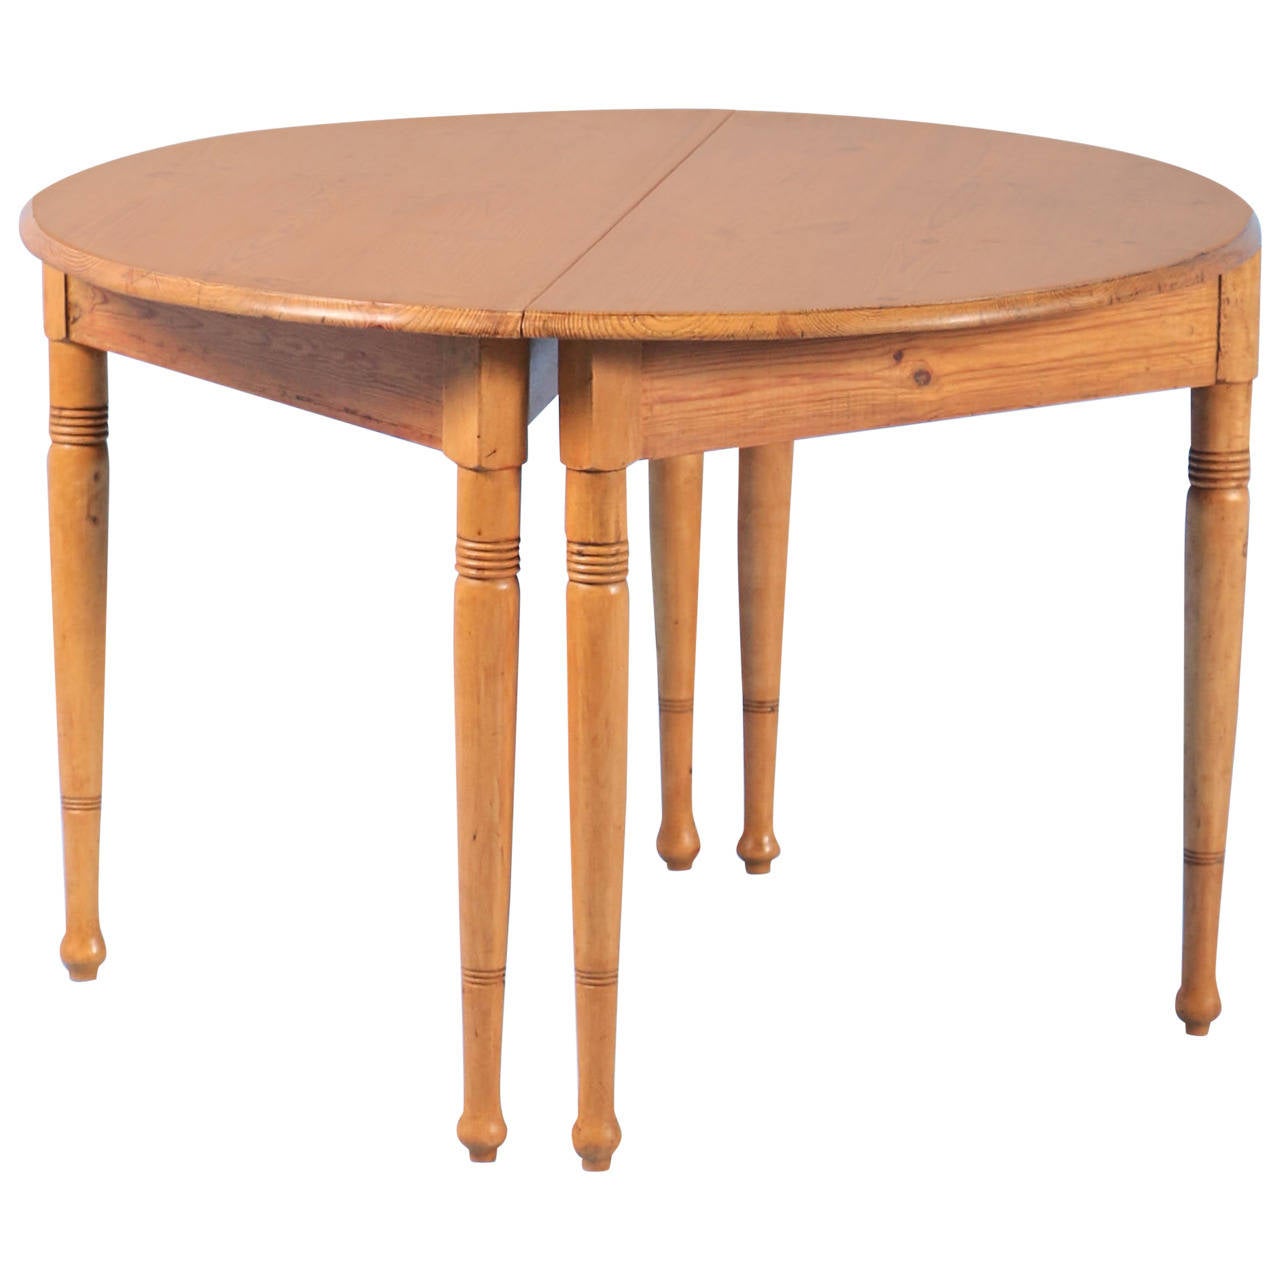 Lovely lines grace the silhouette of this charming pair of Swedish Demi-Lune pine tables. Note the gently turned legs with simple carved detail. The pine has been given a wax finish, bringing out the warmth of the wood. Both tables are solid and